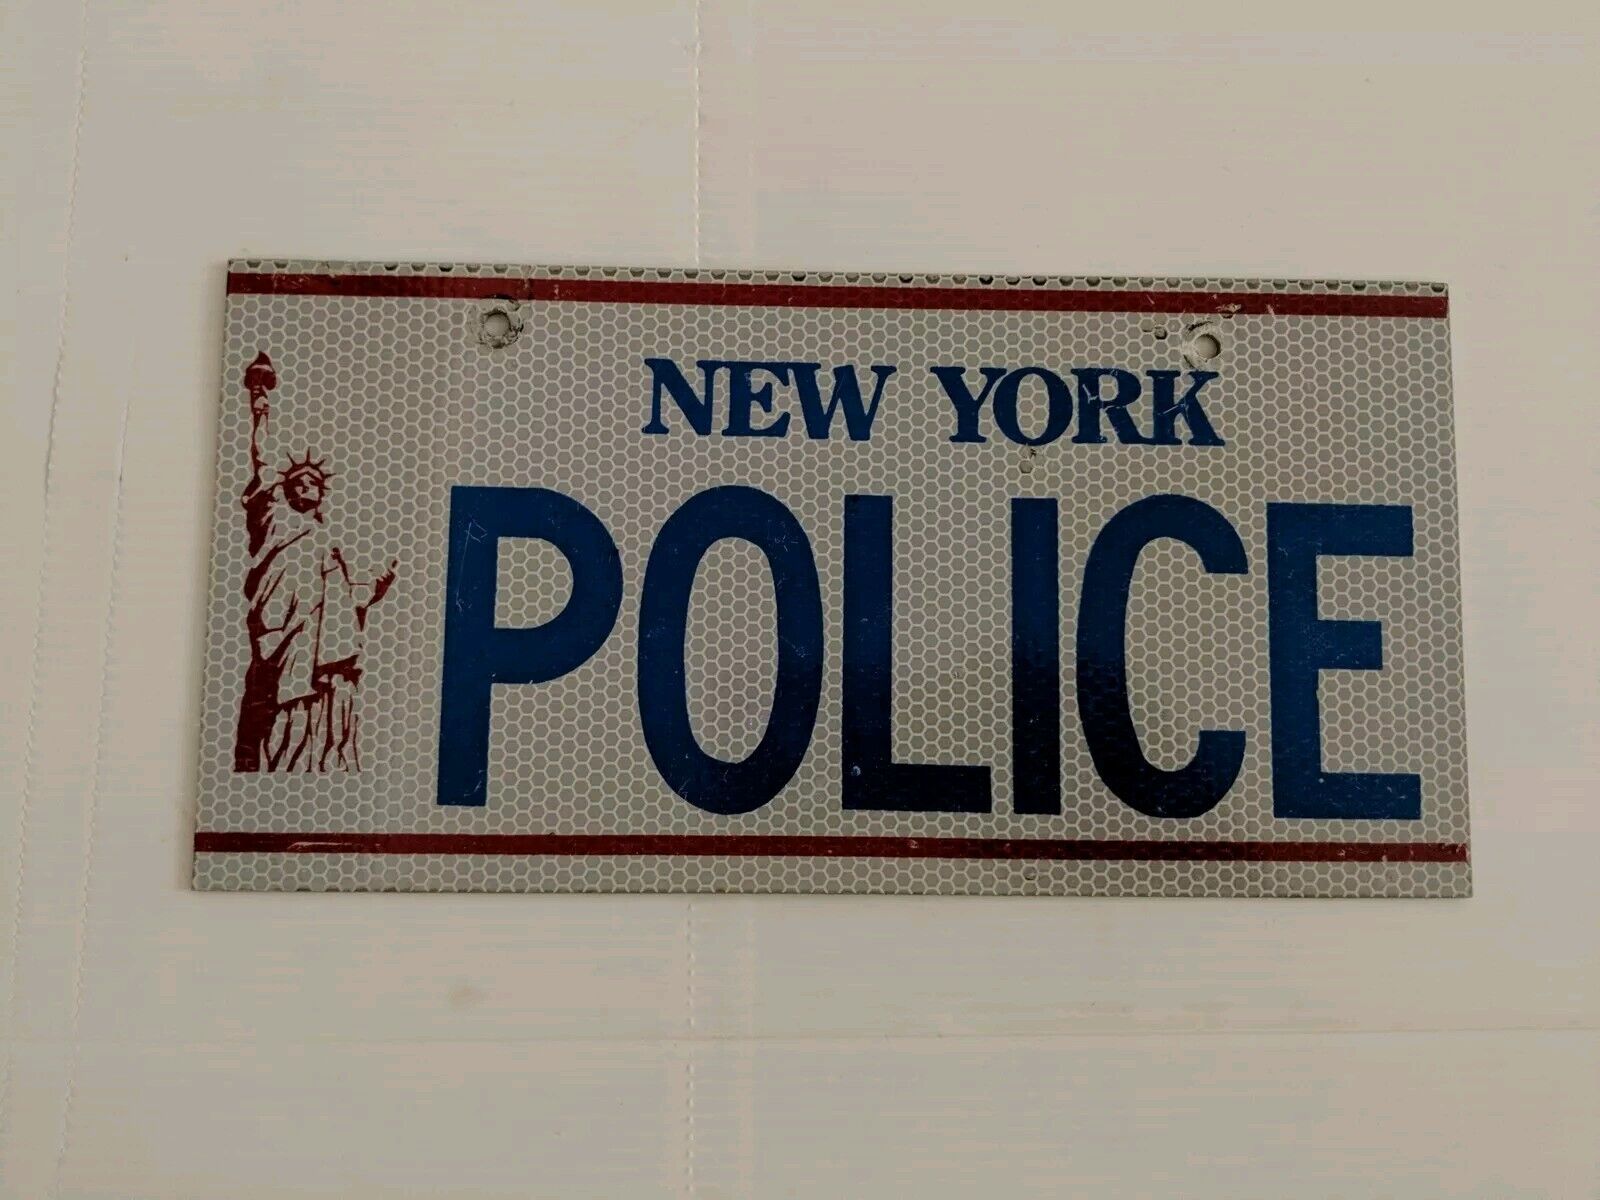  NEW YORK Statue Of Liberty POLICE License Plate 